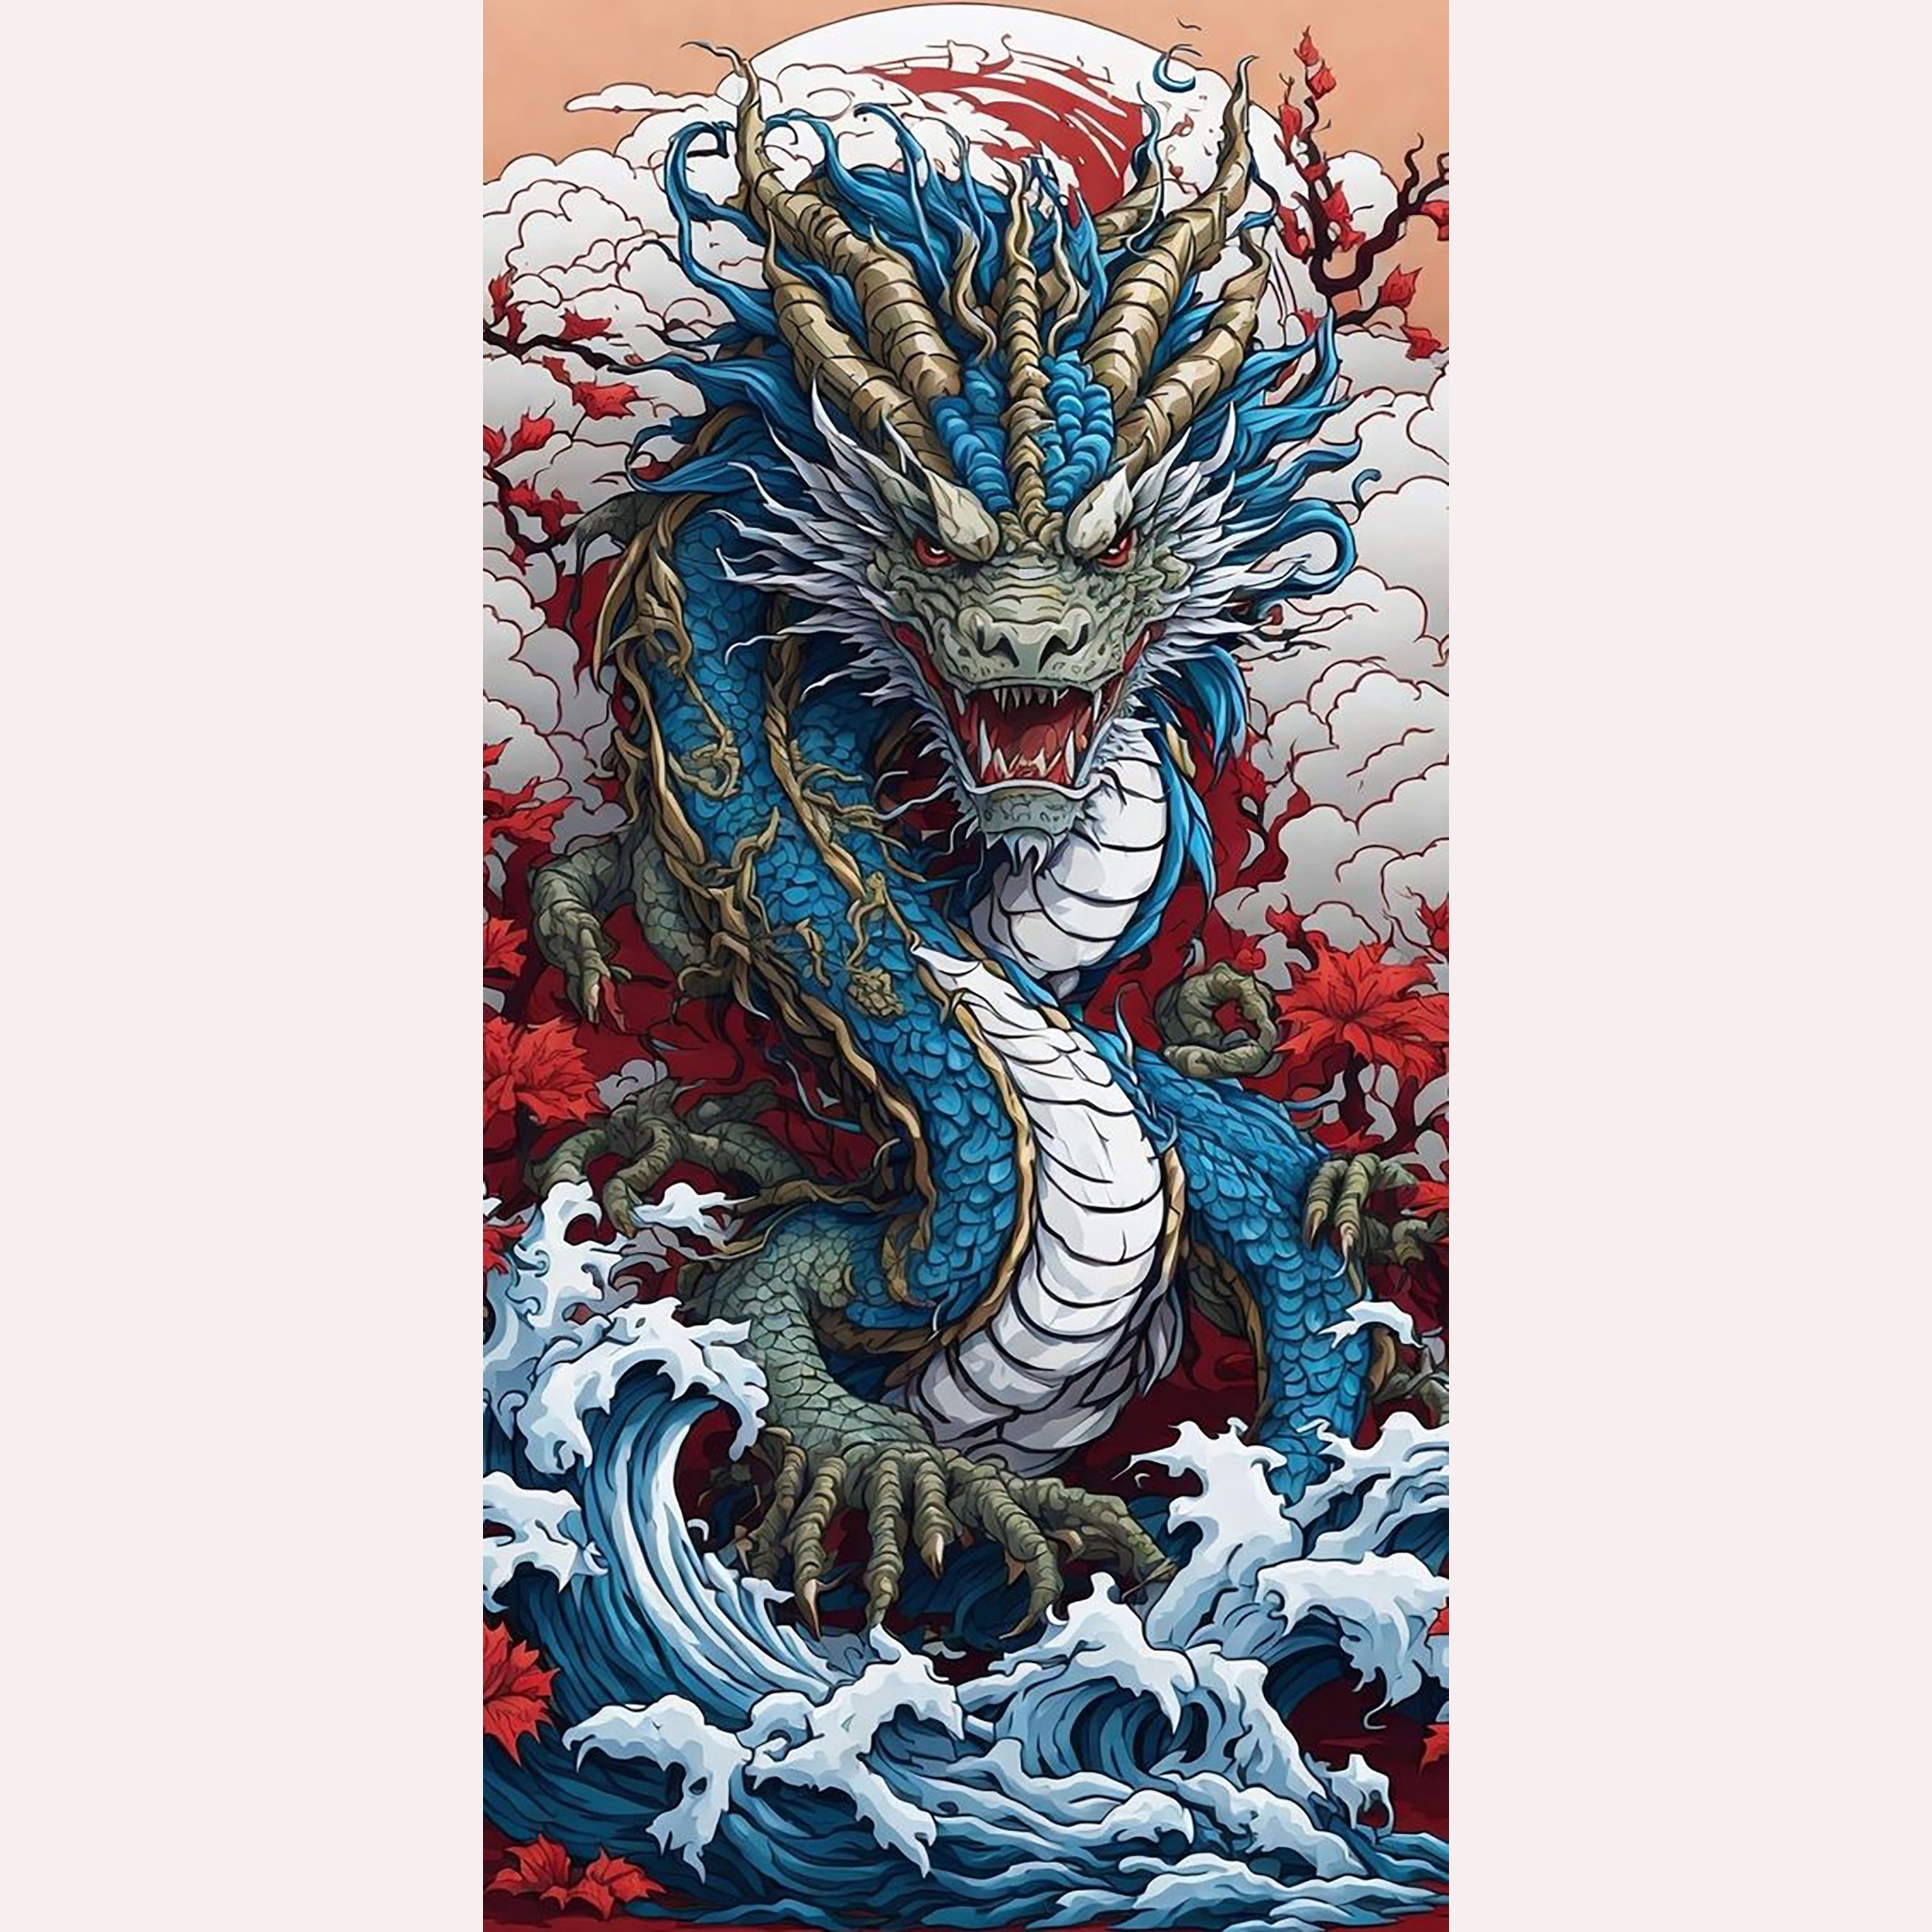 

Anime Dragon 5d Diy Diamond Painting Kit, Full Round Drill Acrylic Diamond Embroidery Set, Wall Decor Arts And Crafts For Adults, Mosaic Cross Stitch Home Decoration Gift - 19.6x39.3 Inch